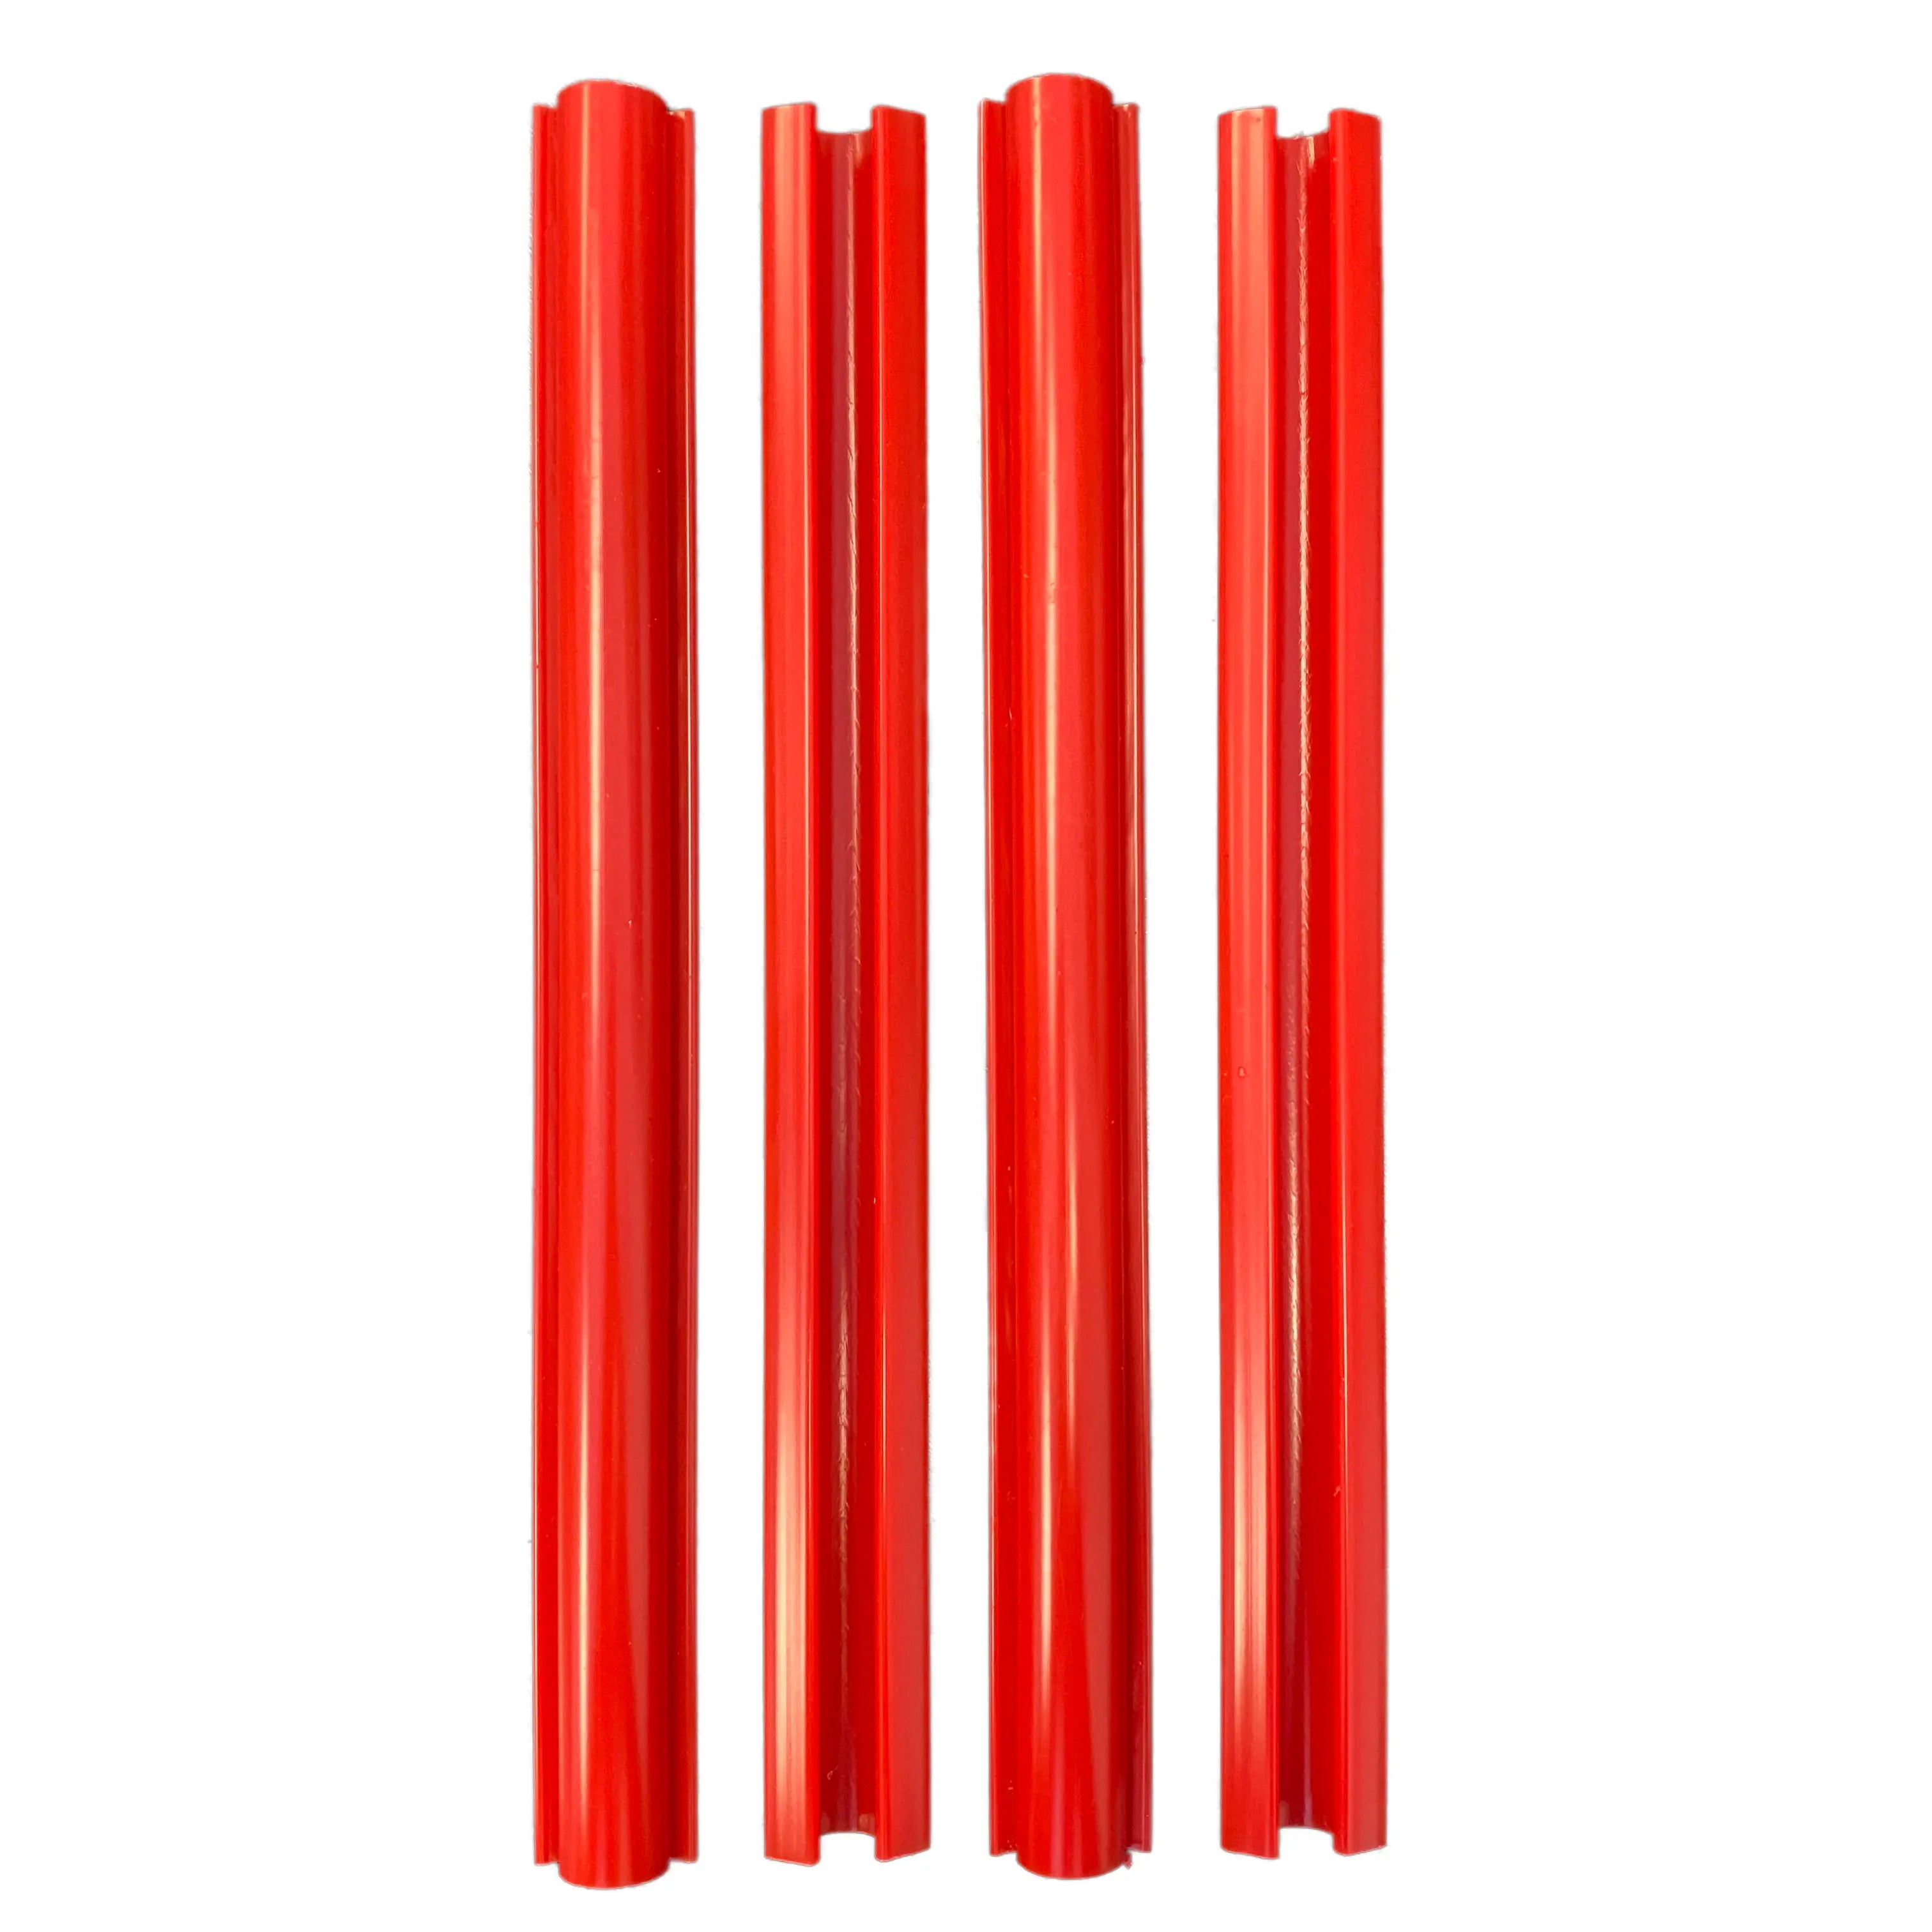 Red Snappers Qfls 10' or Optional 12' Quilt Clip Fabric Loading System, Rods Fit Into Your Leader Casing, Clamps Hold Quilt Top Encased Rods